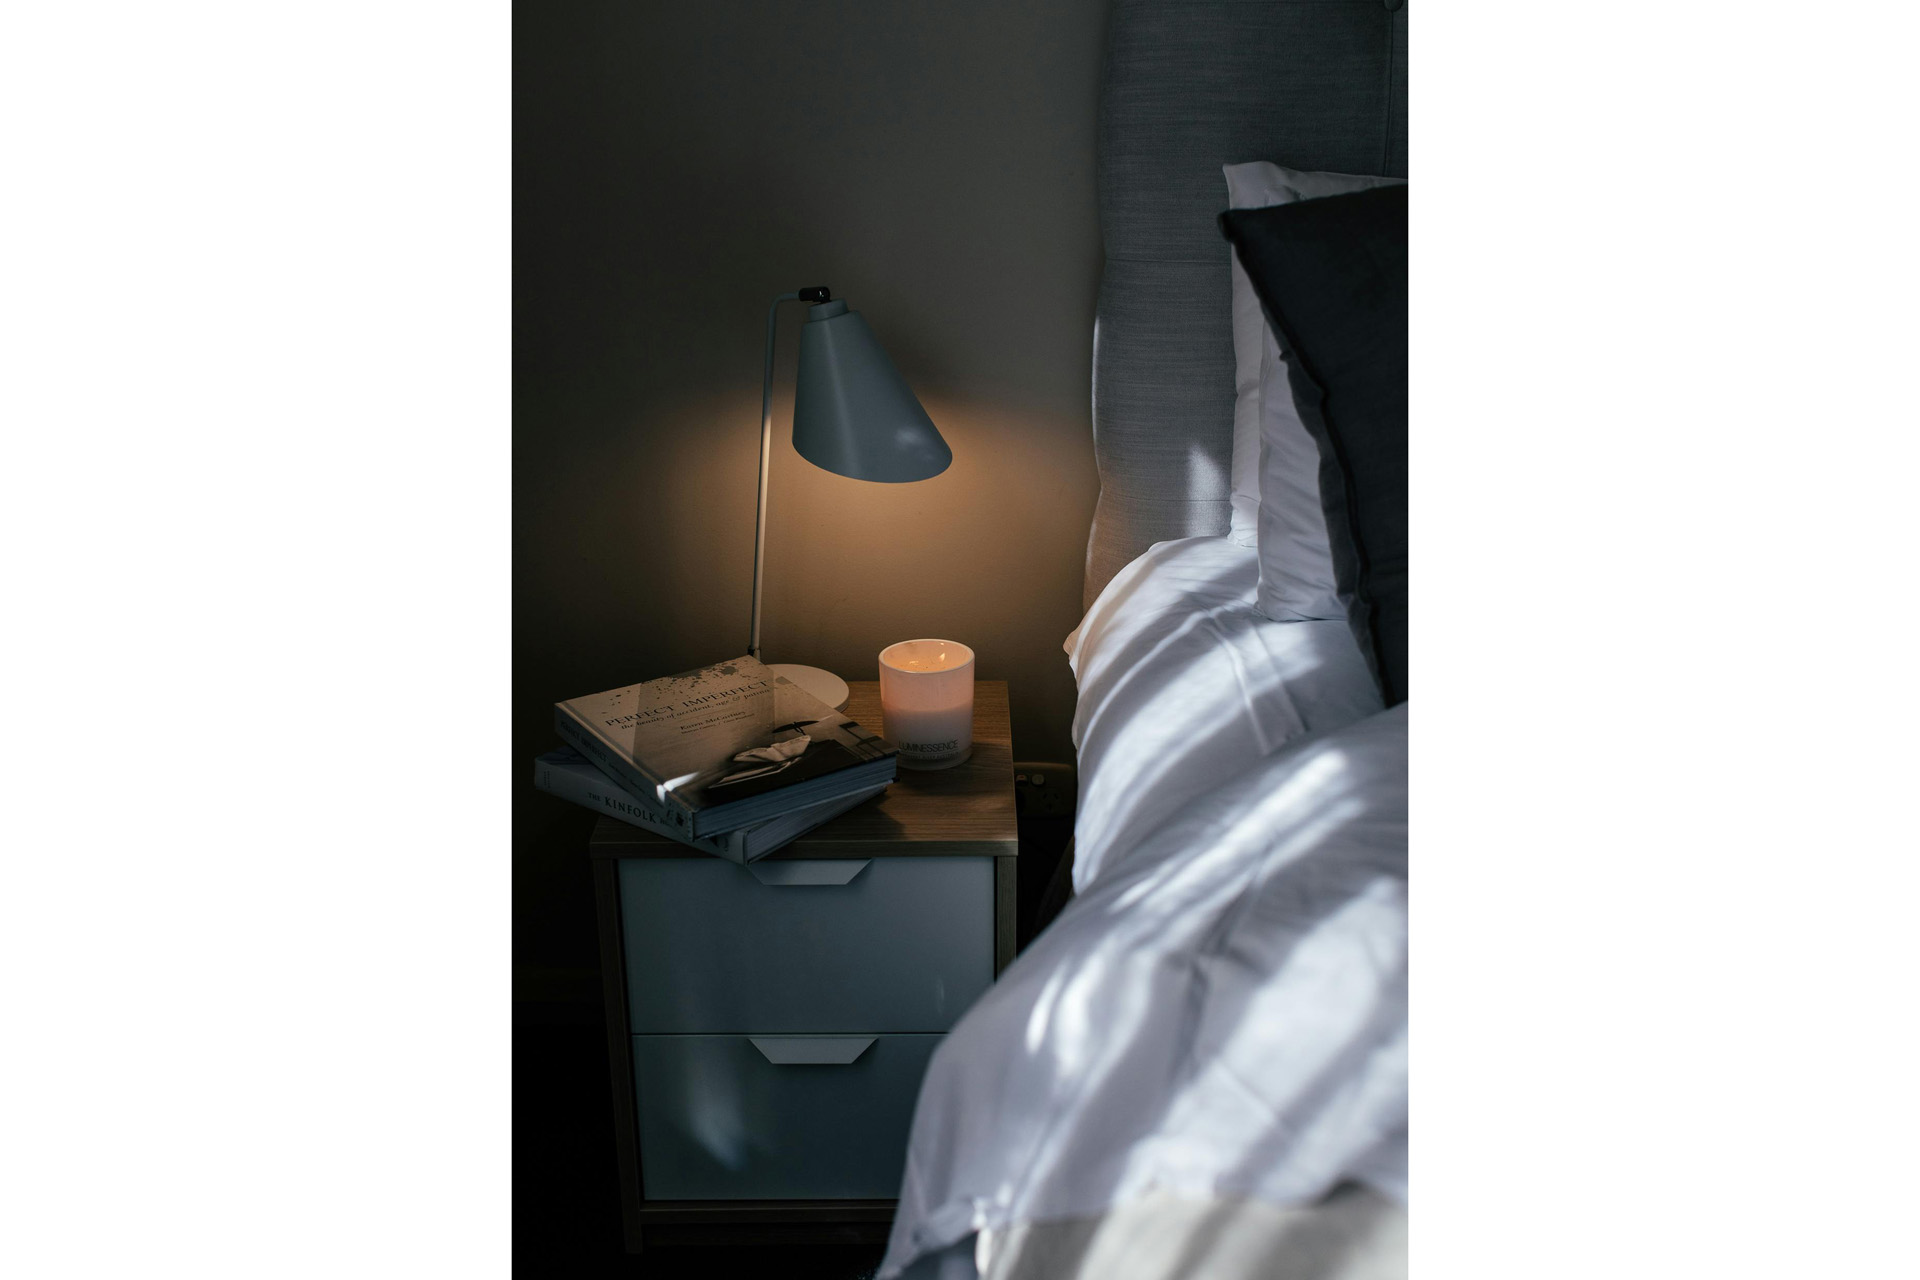 A bed with books and a lamp on the side table